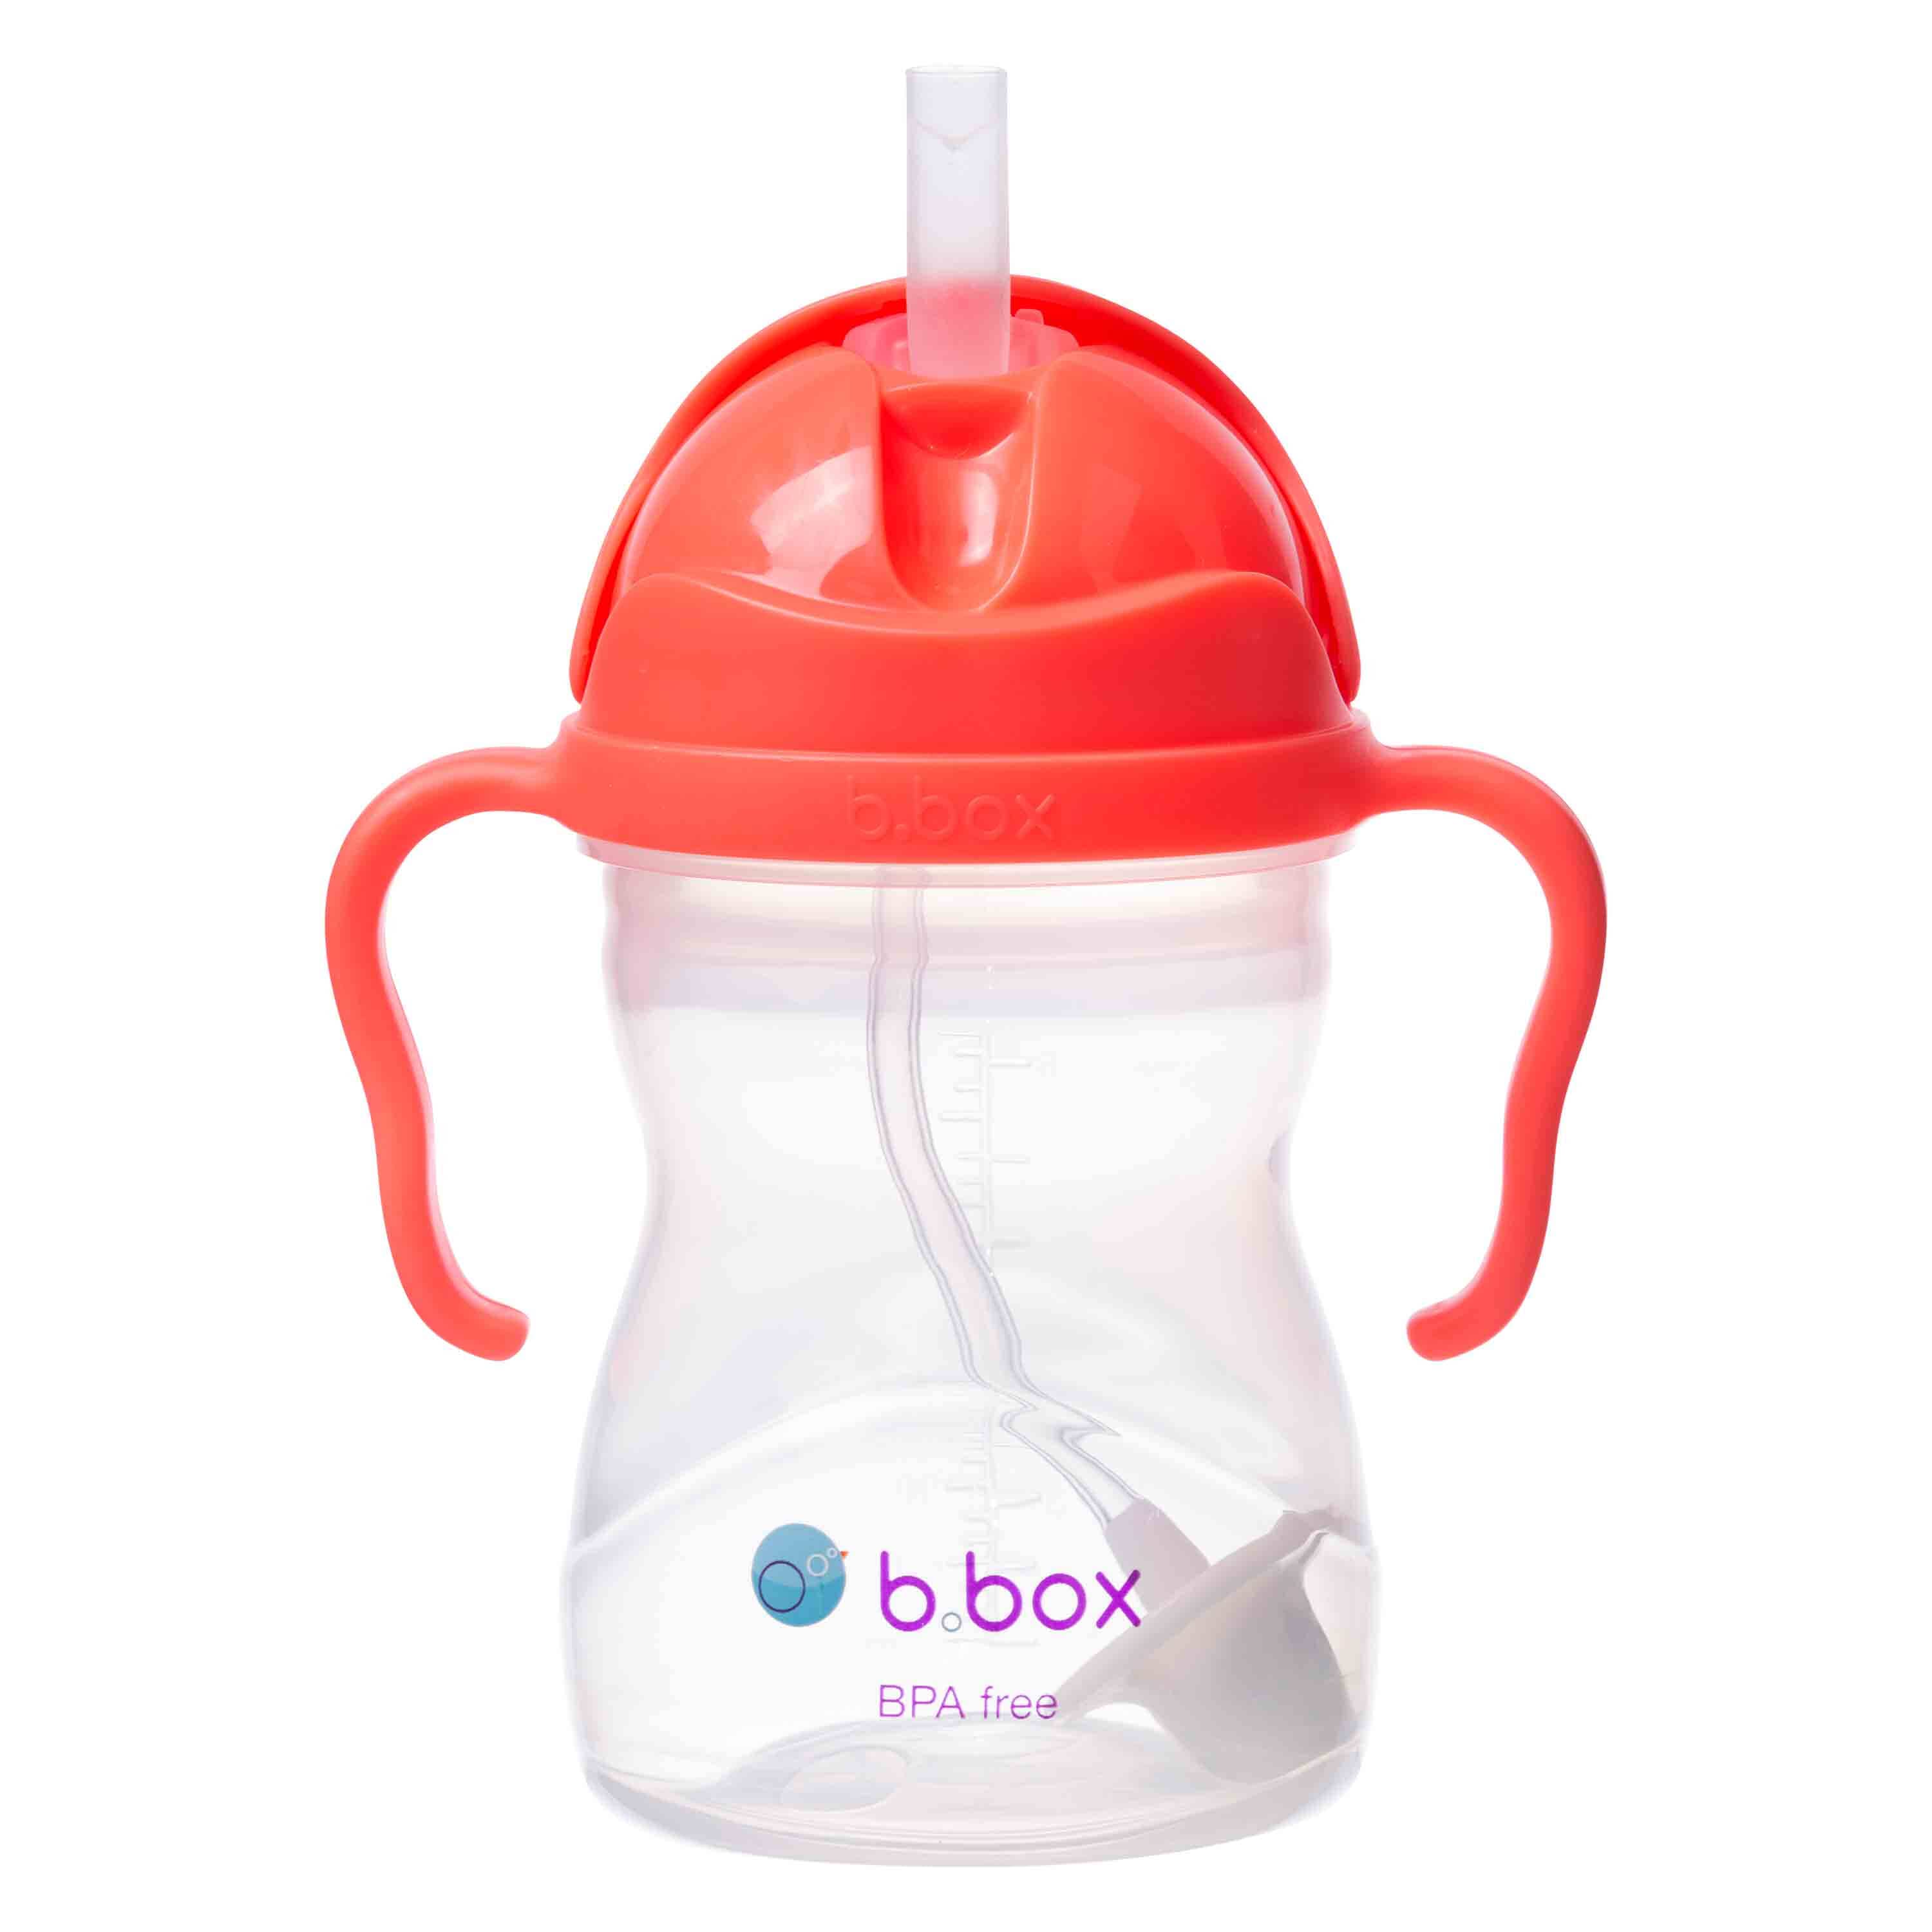 B.BOX - Sippy Cup V2 - Neon Watermelon Meal Time B.BOX